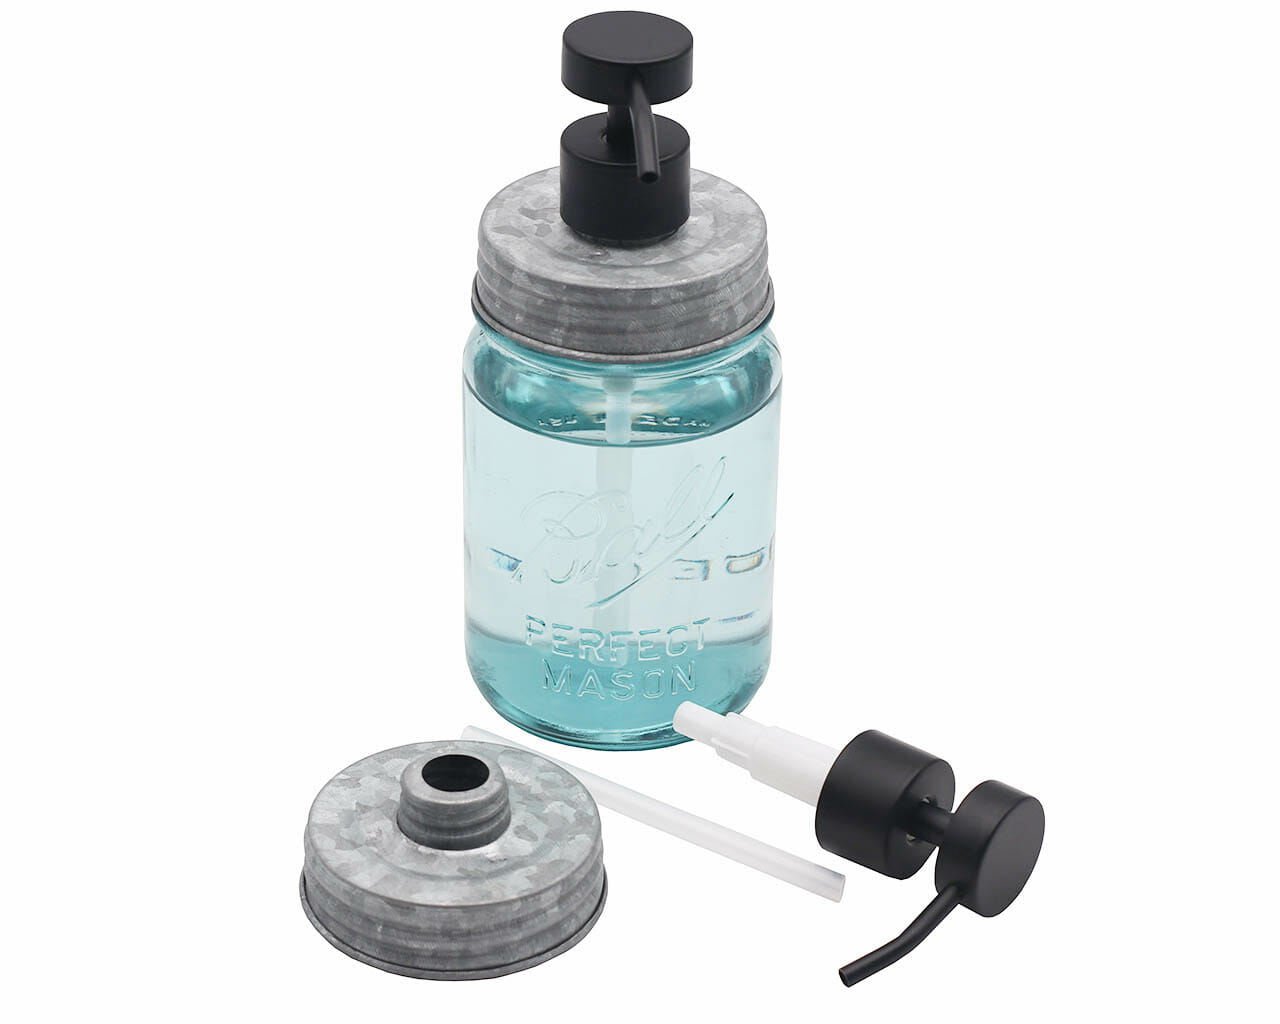 Threaded Matte Charcoal Black Soap Dispenser with Galvanized Lid for Regular Mouth Mason Jars Style #2